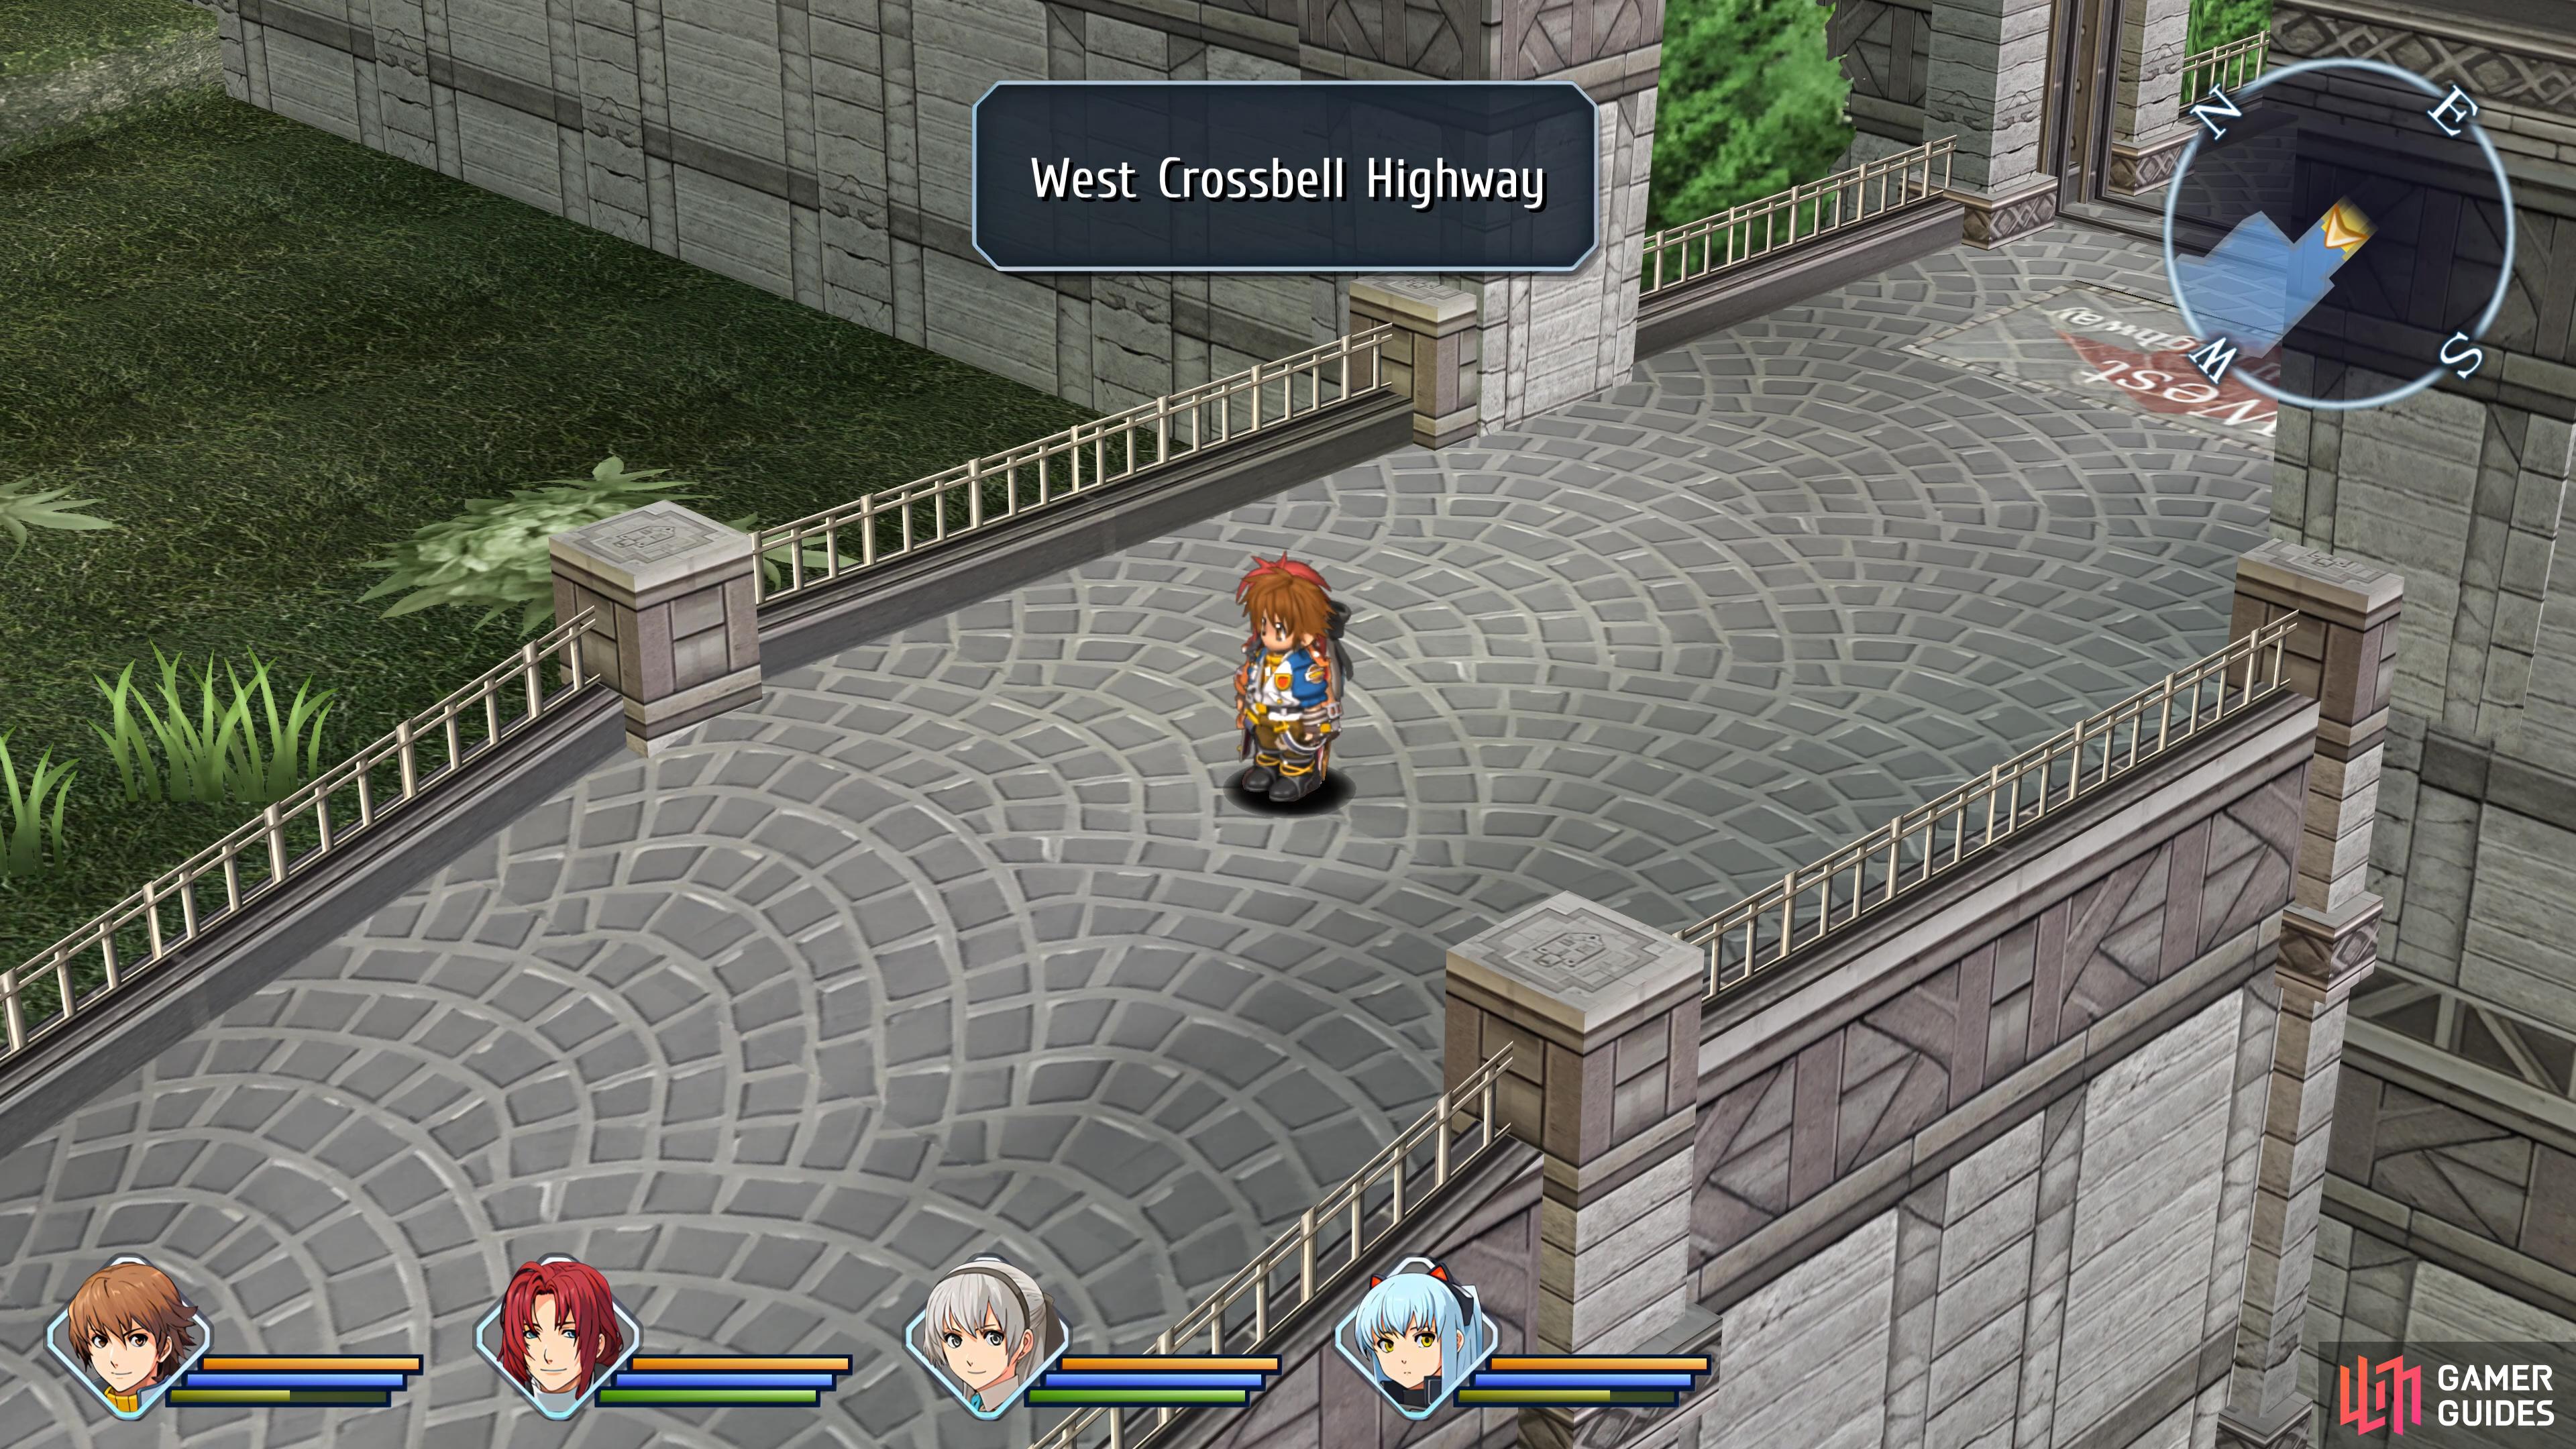 You first gain access to West Crossbell Highway during Chapter 2 Day 1.